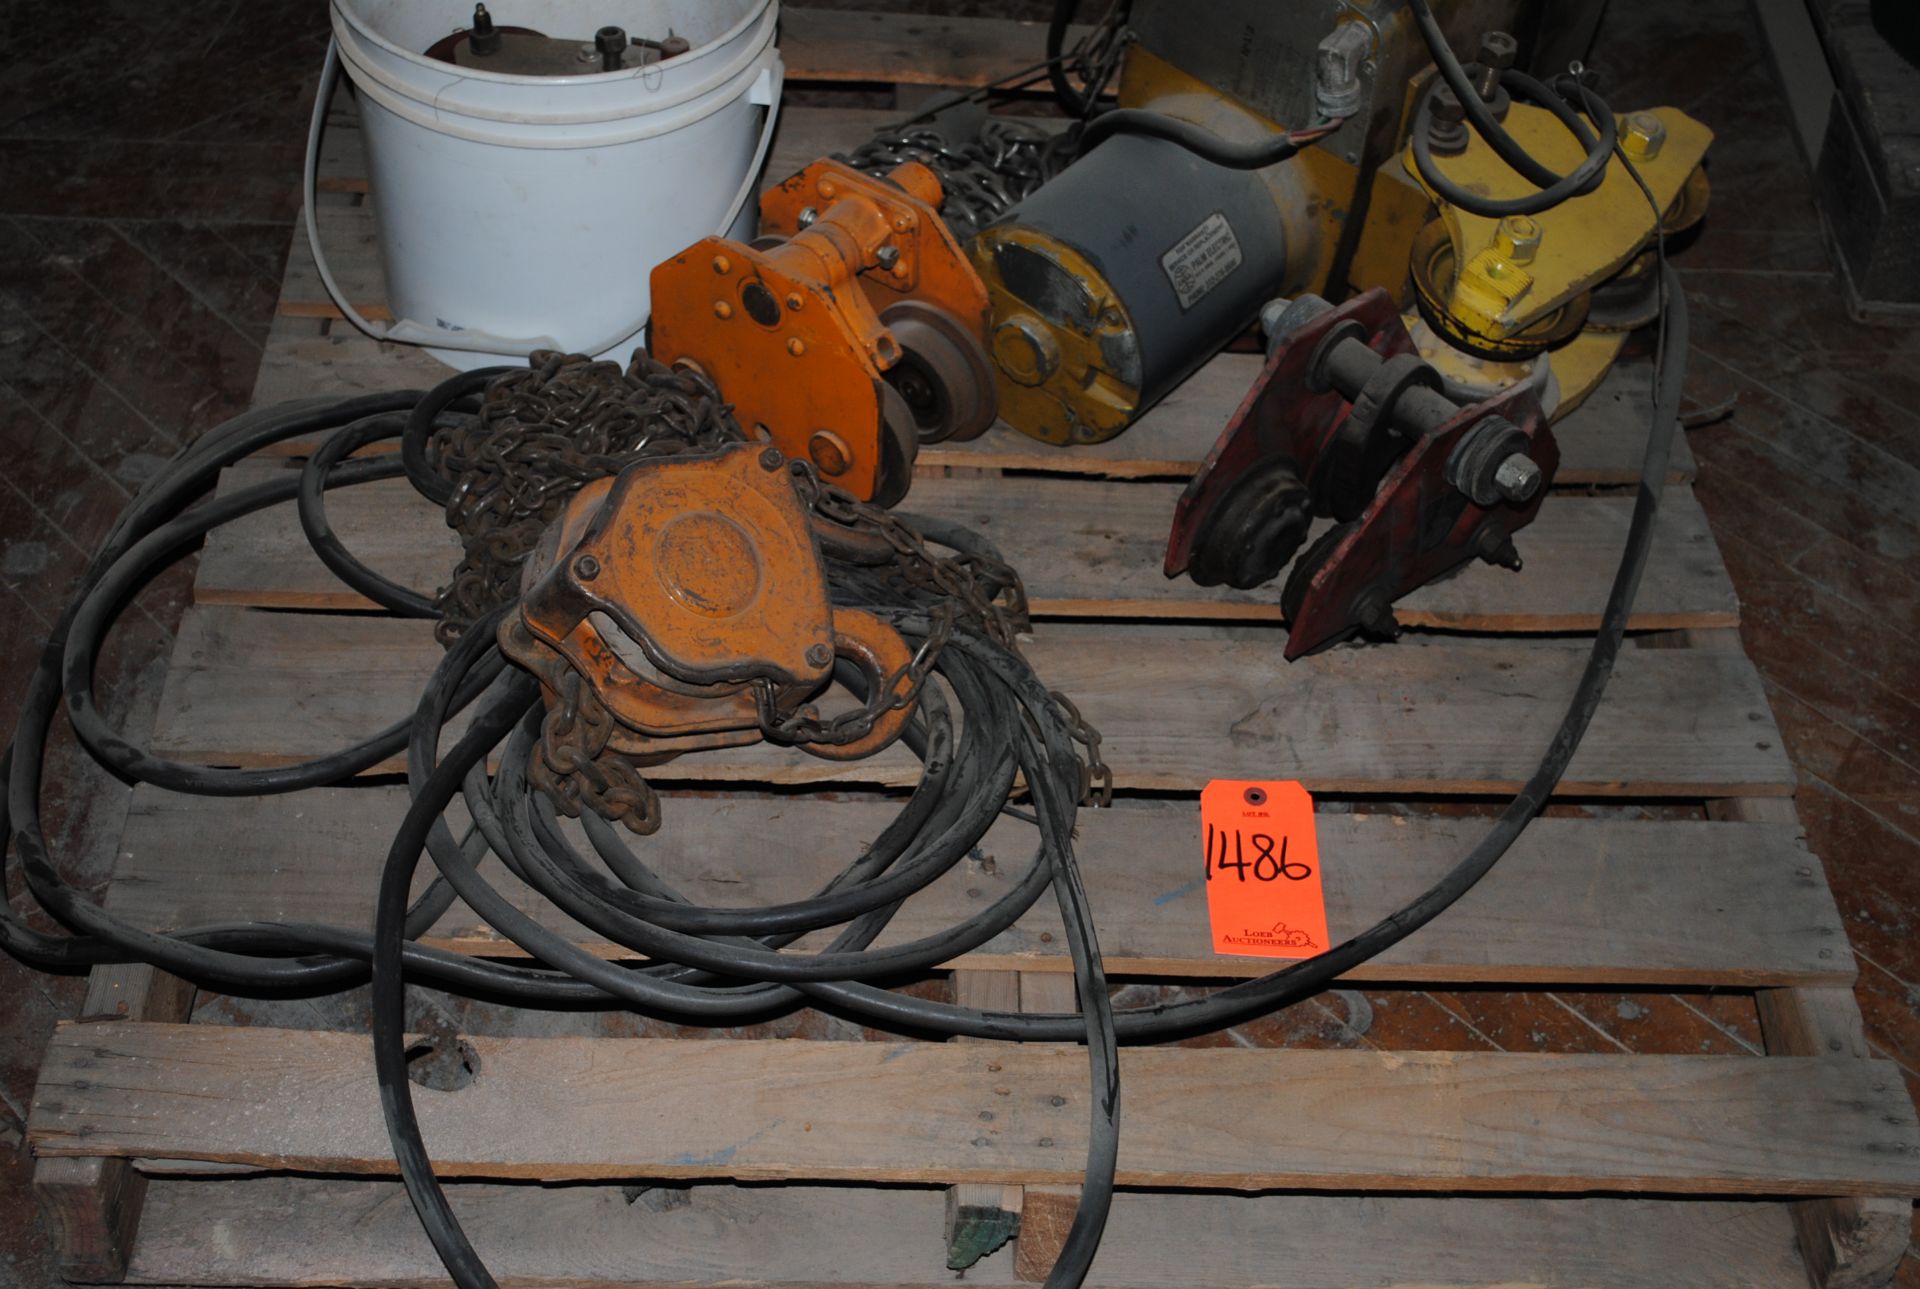 Lot - Assorted Motors, Hoists, and Parts on (1) Pallet